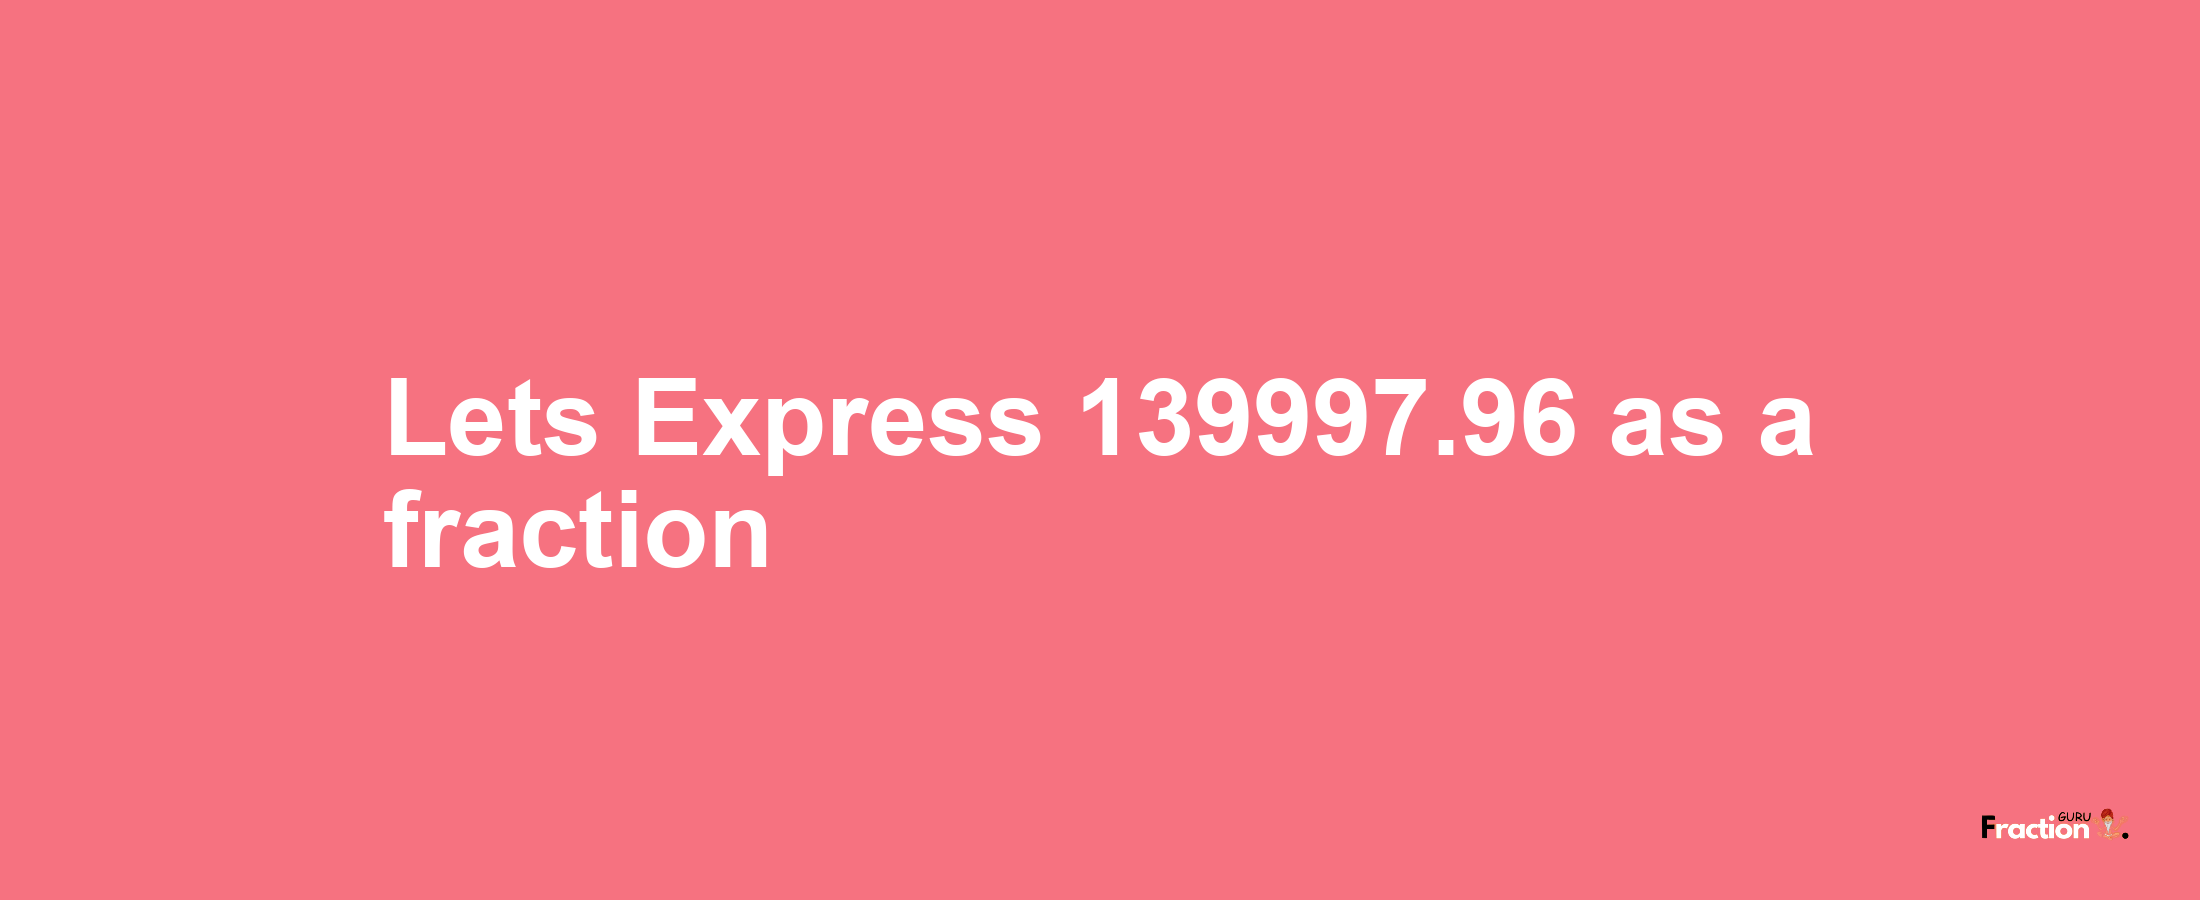 Lets Express 139997.96 as afraction